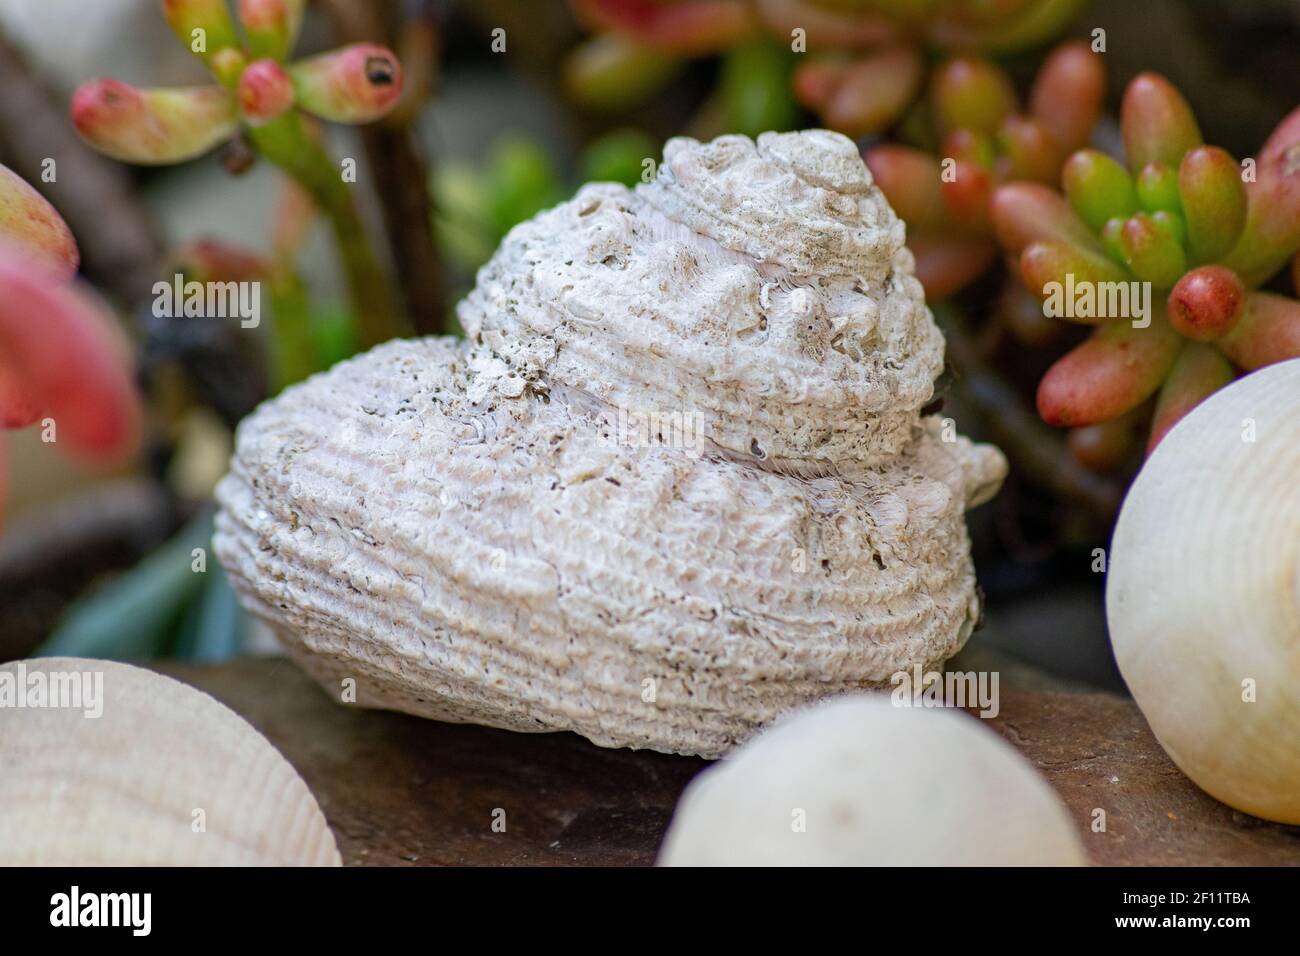 Old ocean snail carapace decorating a garden with succulent Sedum Pachyphyllum or Jellly Bean plant in the background. Summer memories at the beach Stock Photo